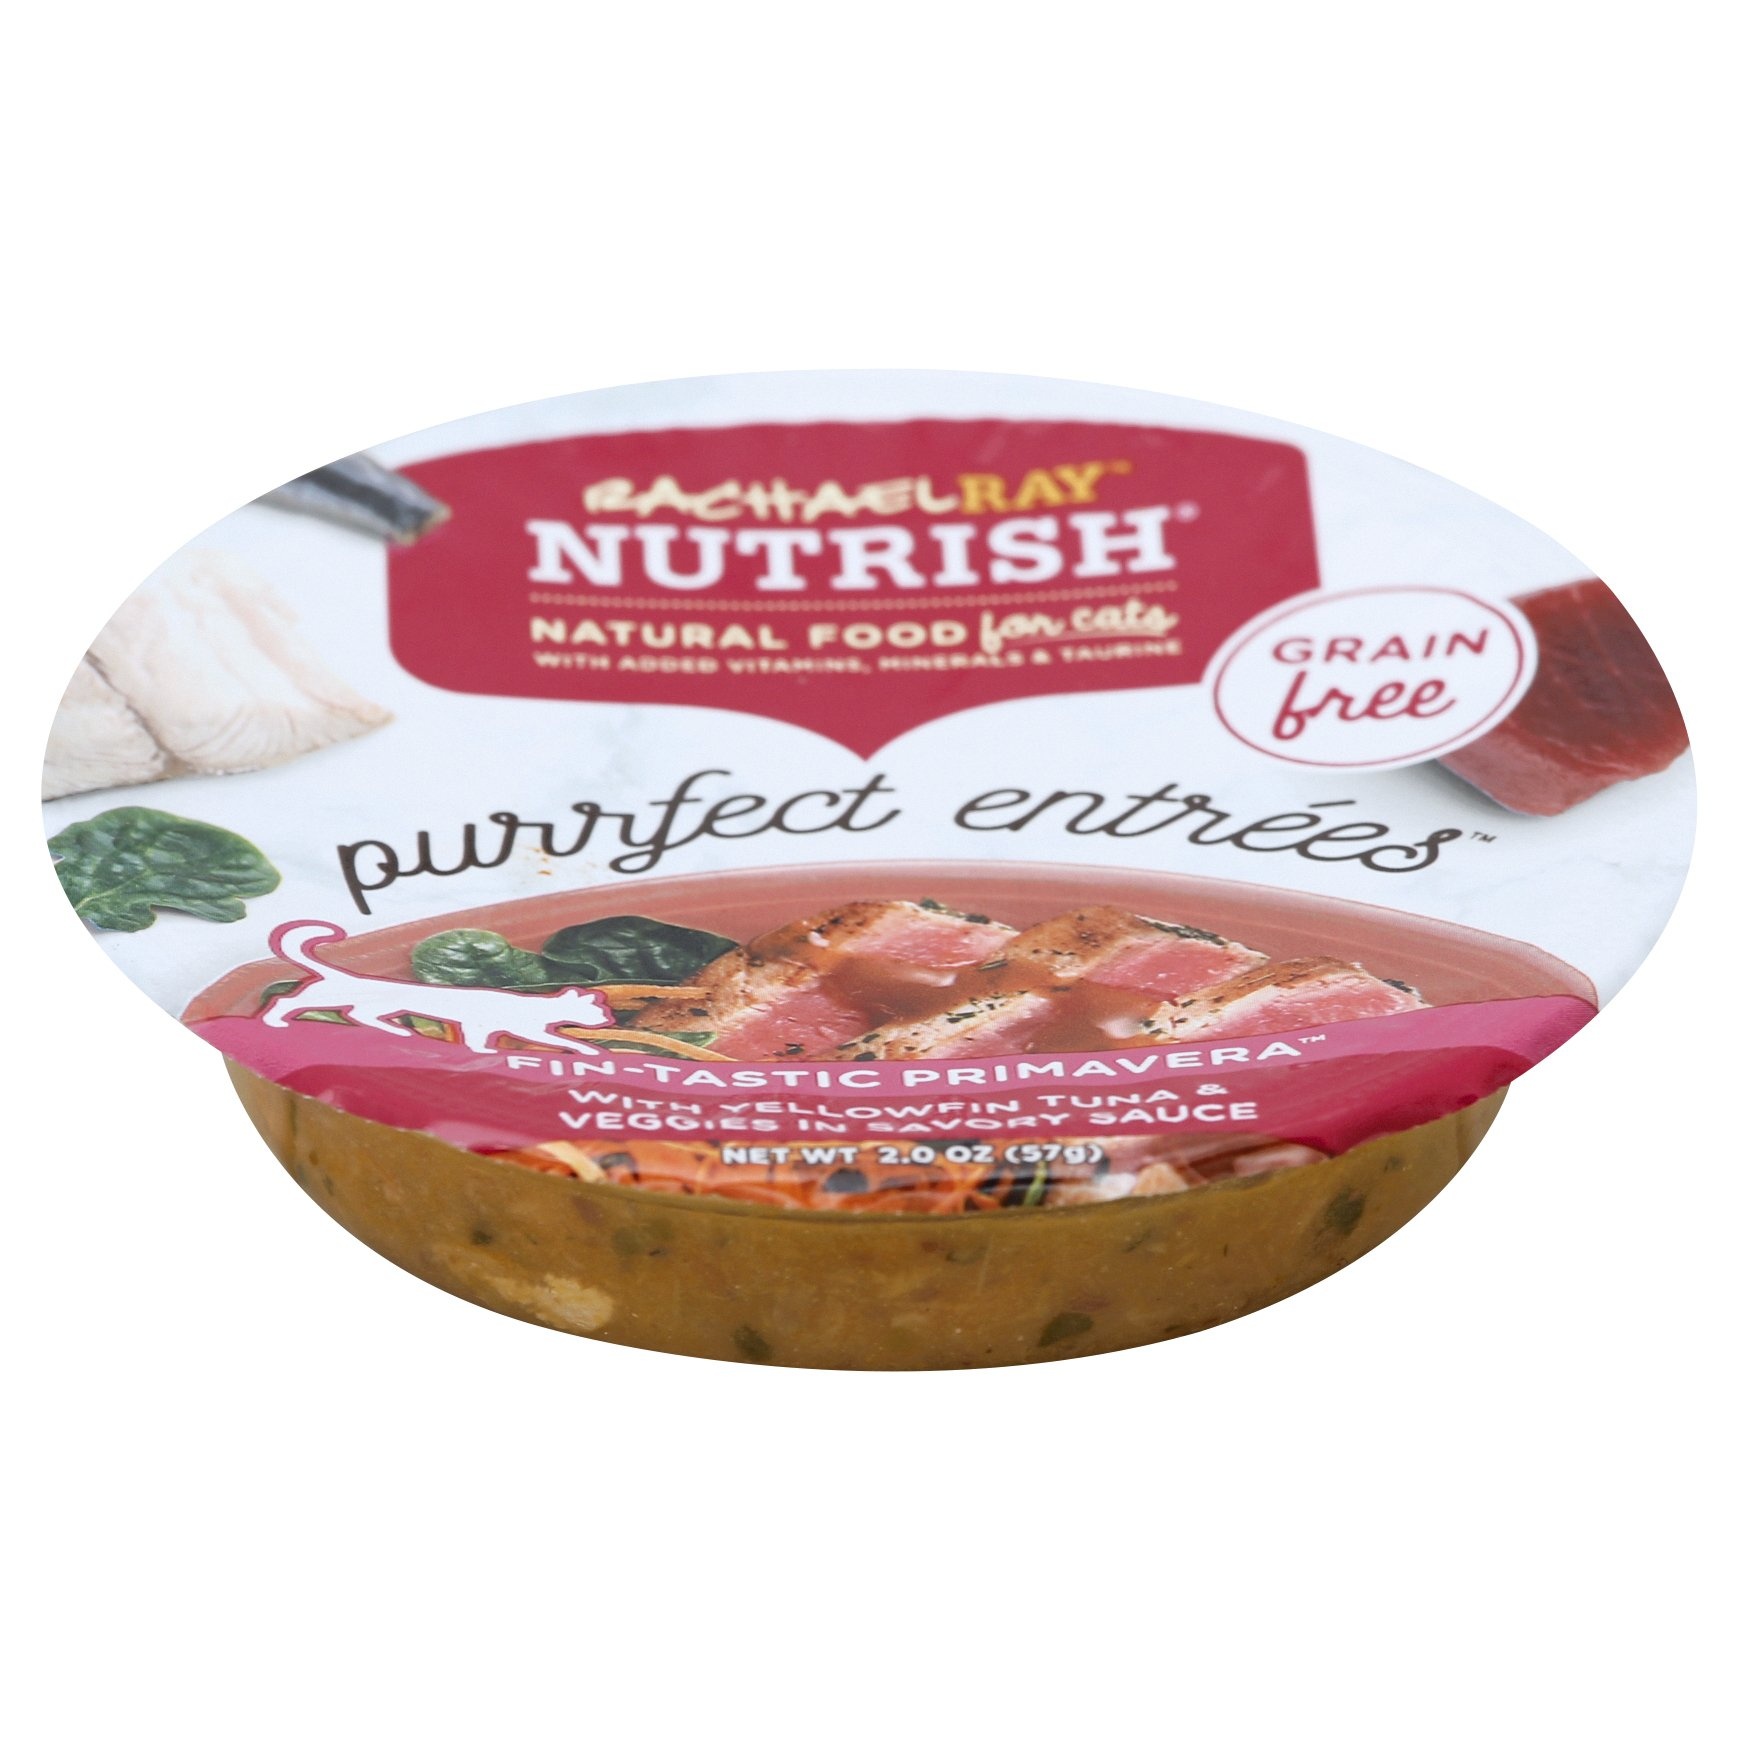 Rachael Ray Nutrish Natural Purrfect Entrees FinTastic Primavera With